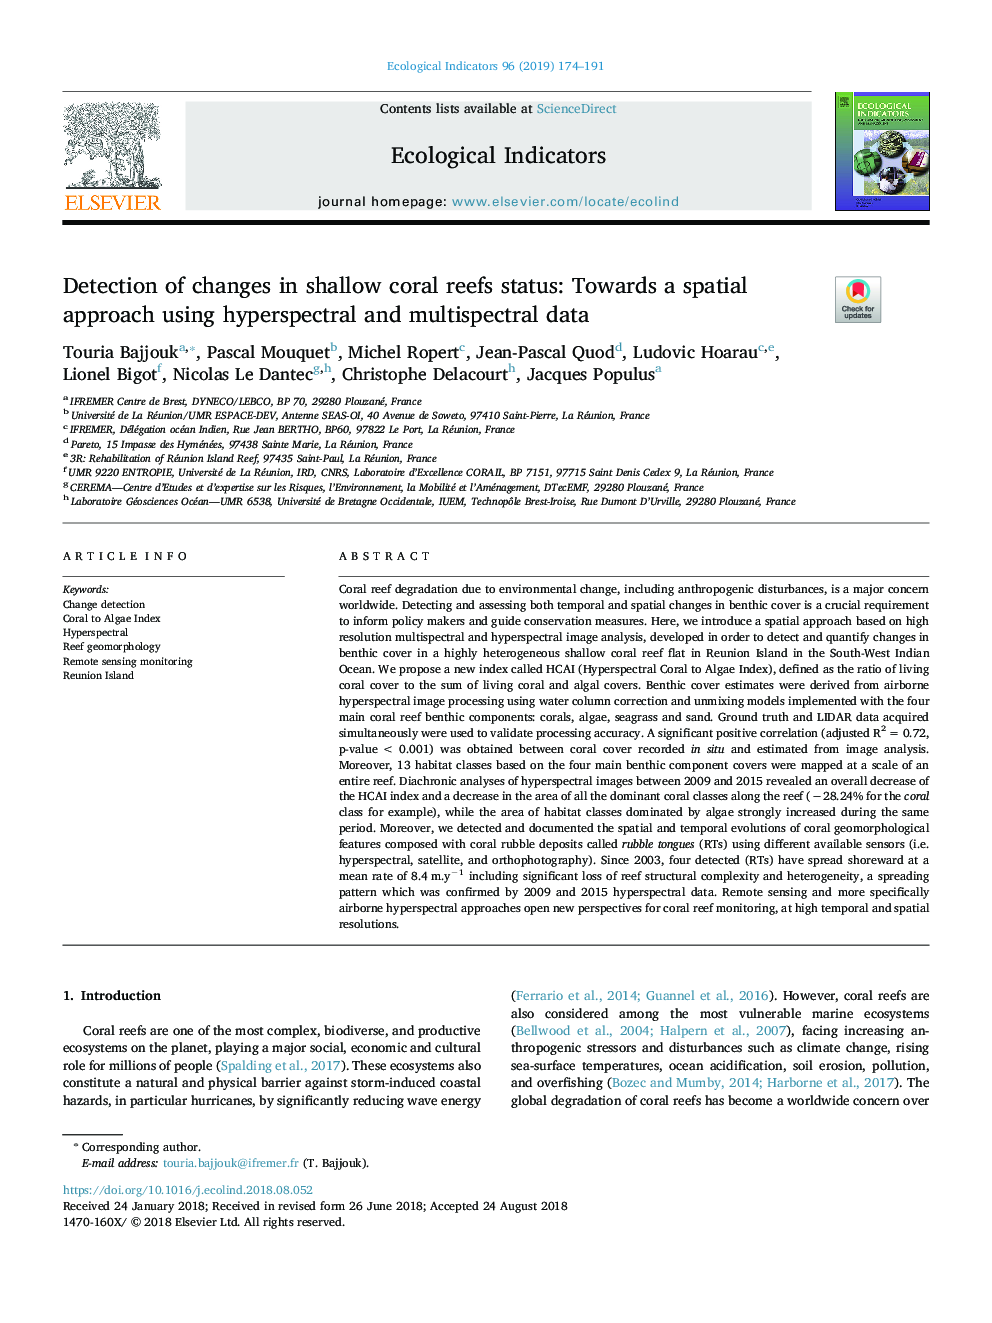 Detection of changes in shallow coral reefs status: Towards a spatial approach using hyperspectral and multispectral data